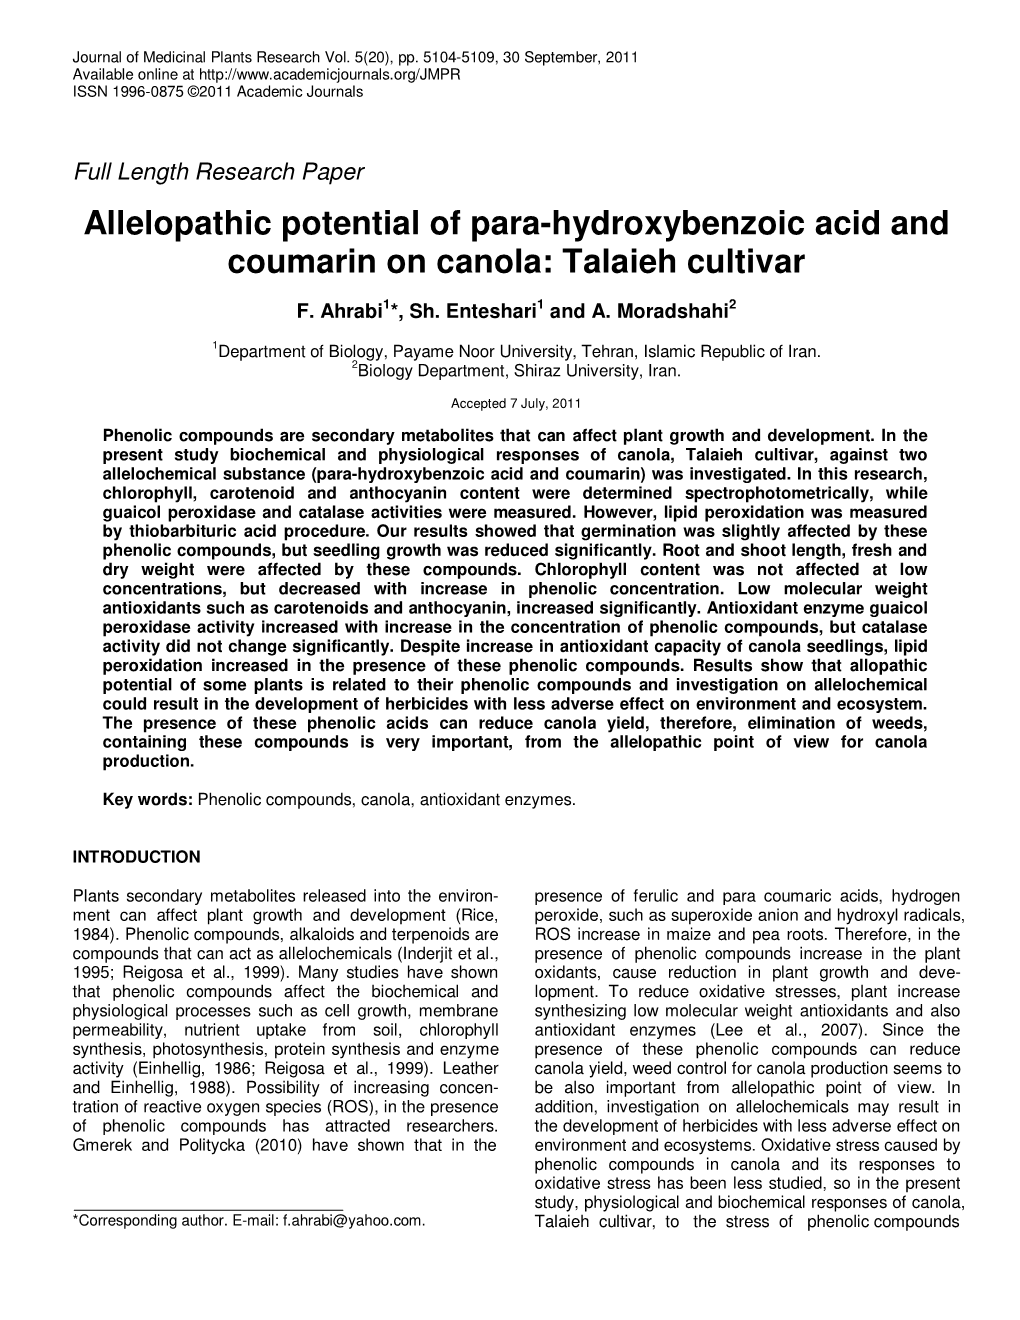 Allelopathic Potential of Para-Hydroxybenzoic Acid and Coumarin on Canola: Talaieh Cultivar